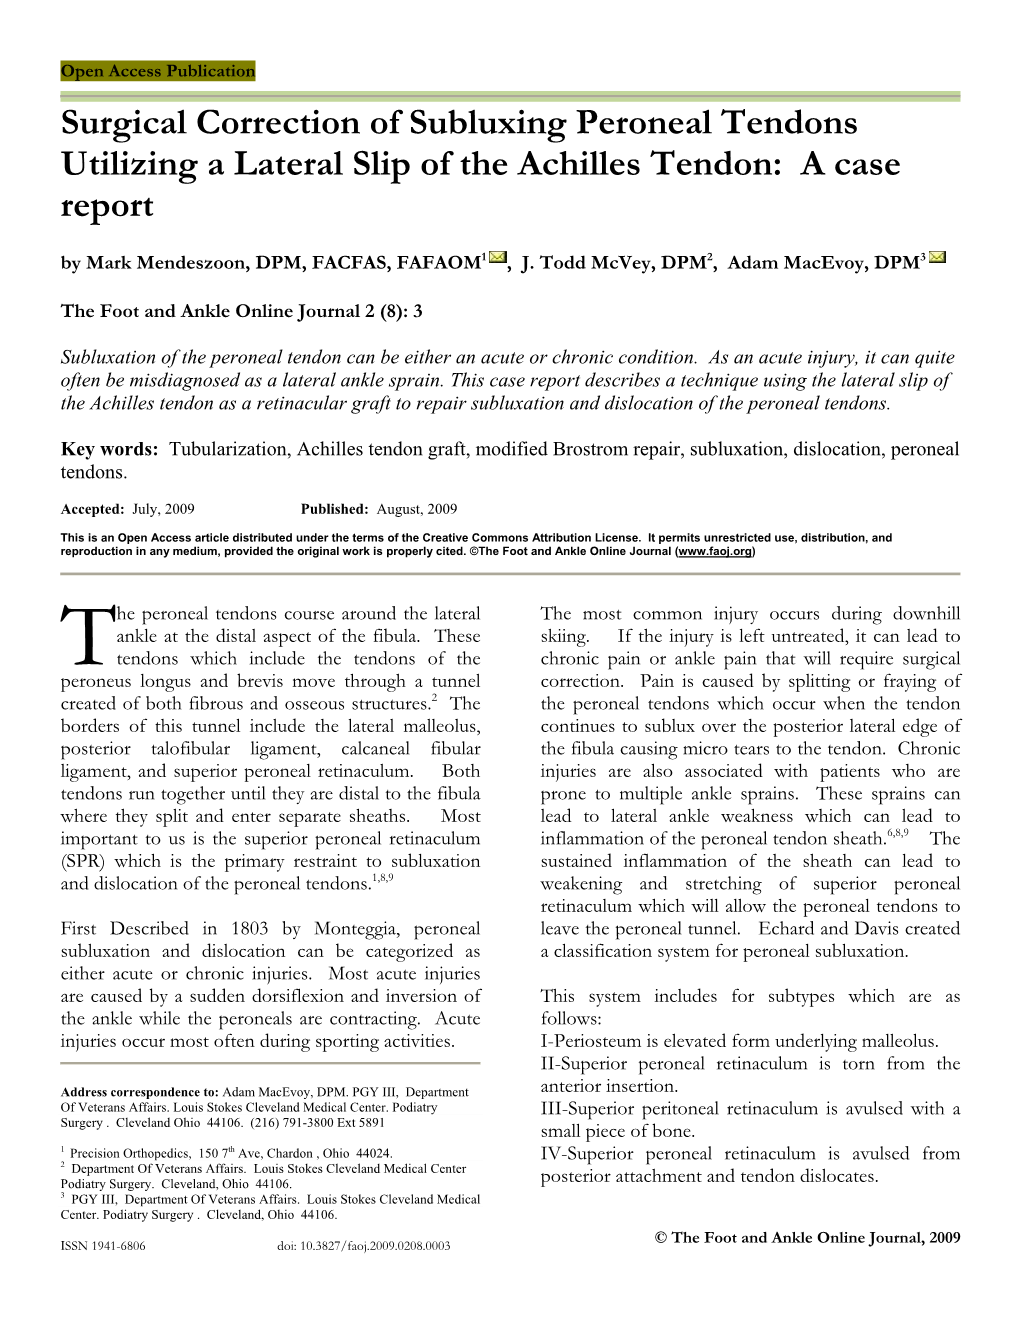 Surgical Correction of Subluxing Peroneal Tendons Utilizing a Lateral Slip of the Achilles Tendon: a Case Report